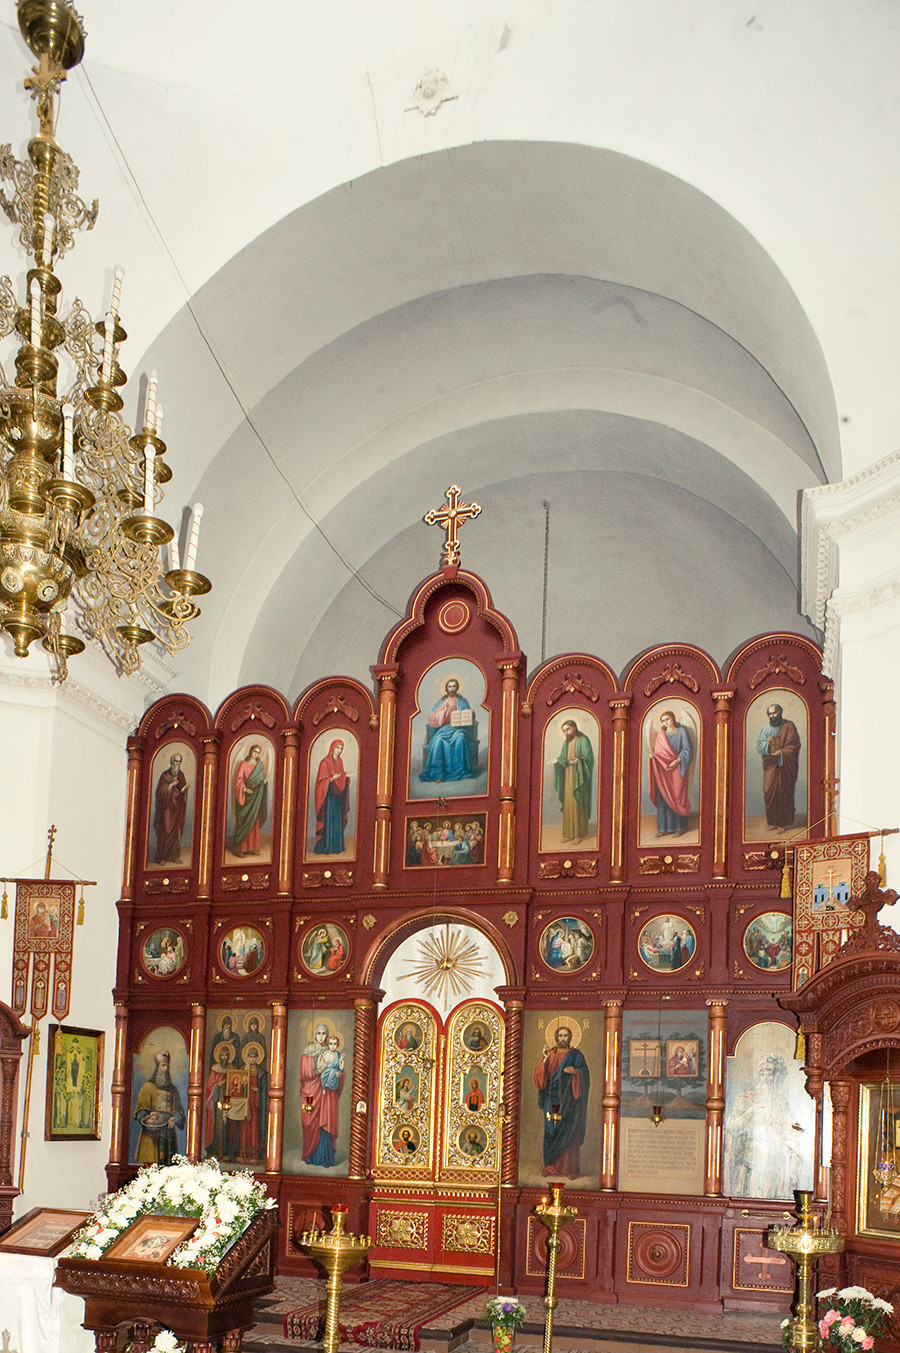 Cathedral of the Okovetsky Icon. Interior, view east toward new icon screen. August 24, 2016.